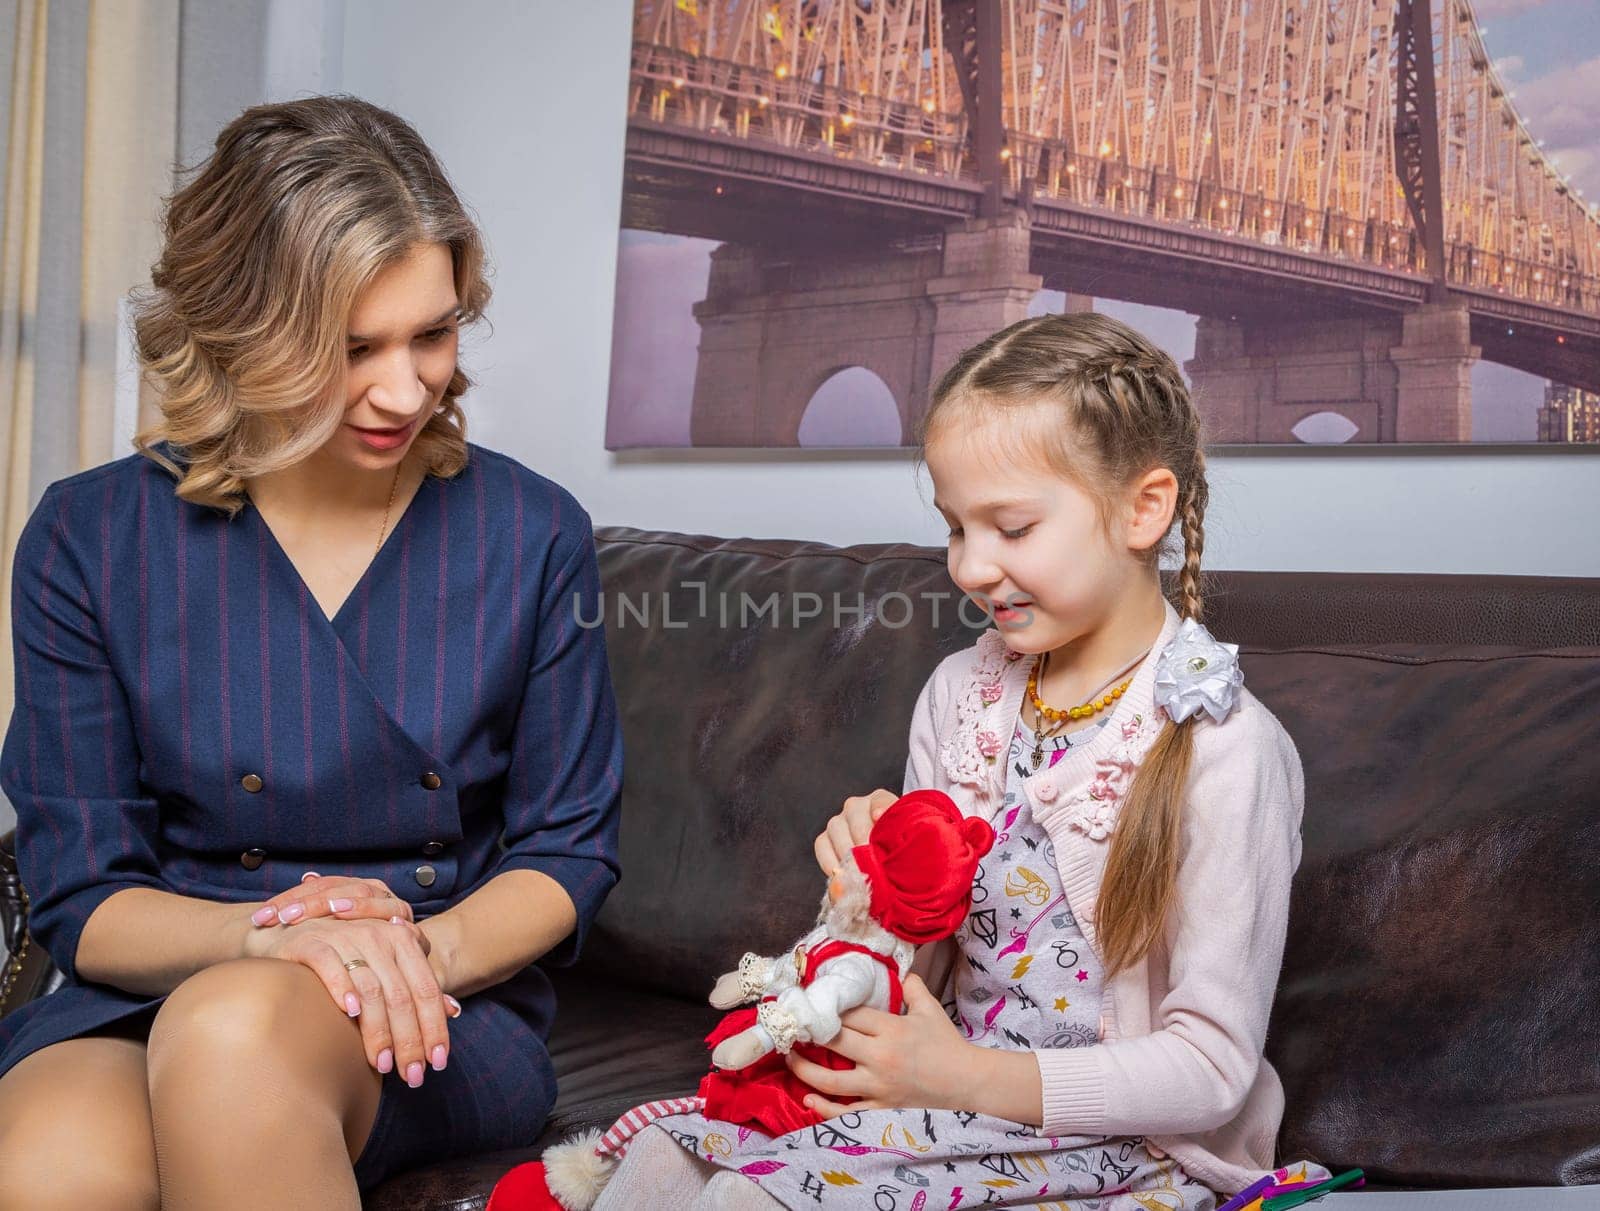 The girl psychologist plays a puppet character game with the child